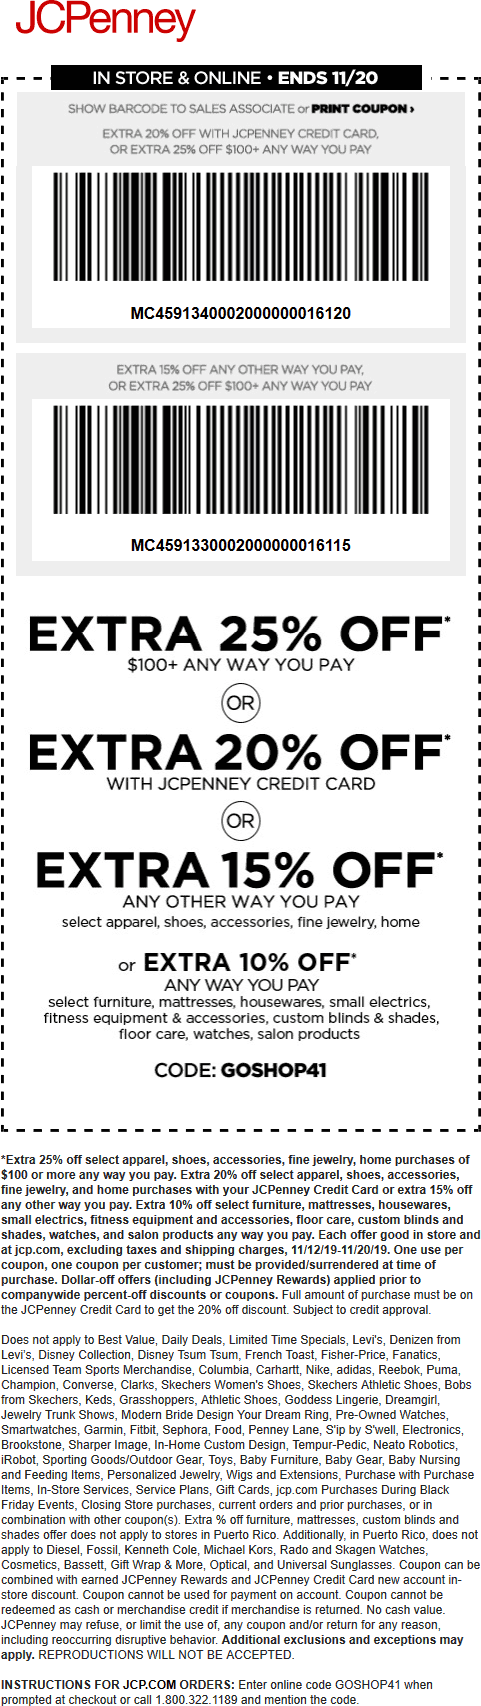 JCPenney coupons & promo code for [October 2022]